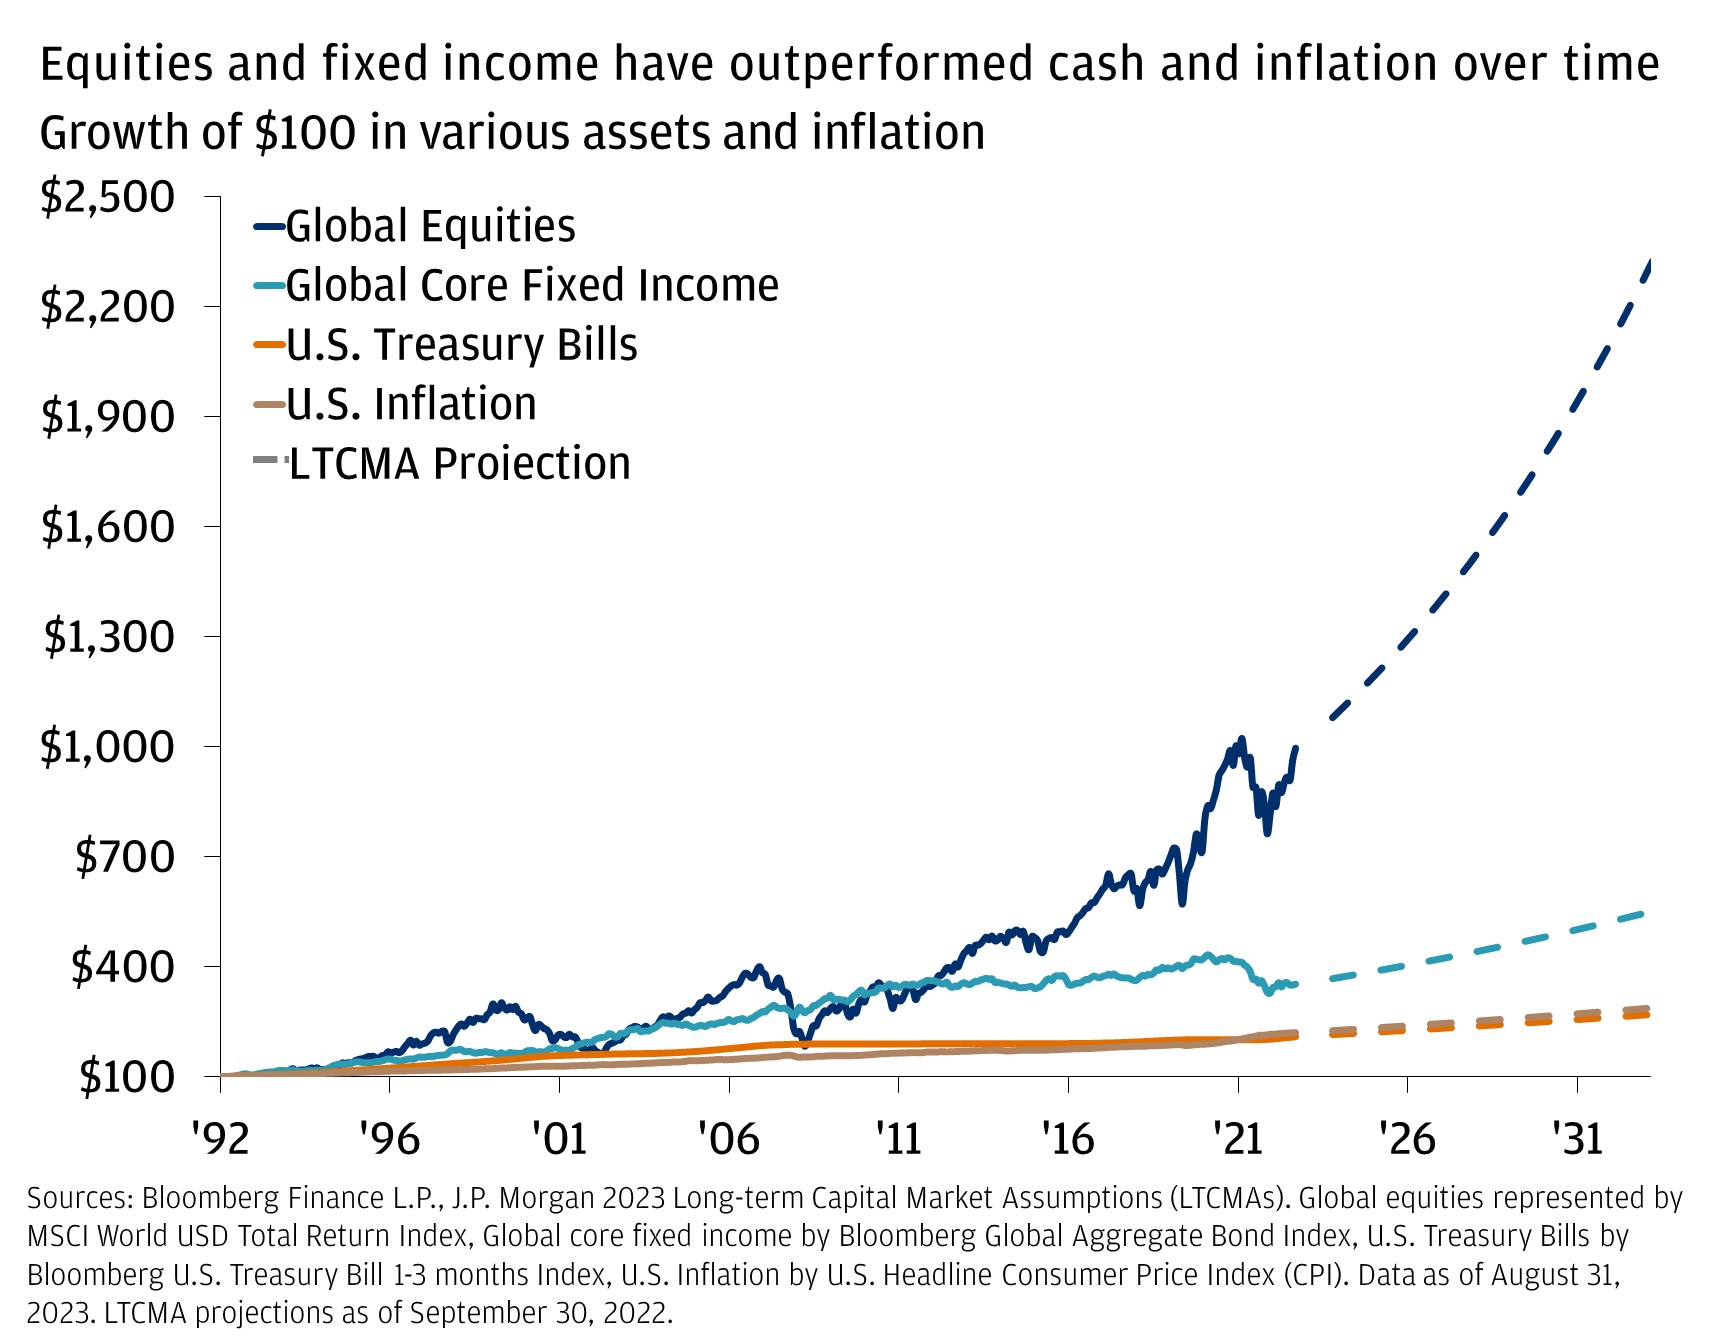 Equities and fixed income have outperformed cash and inflation over time